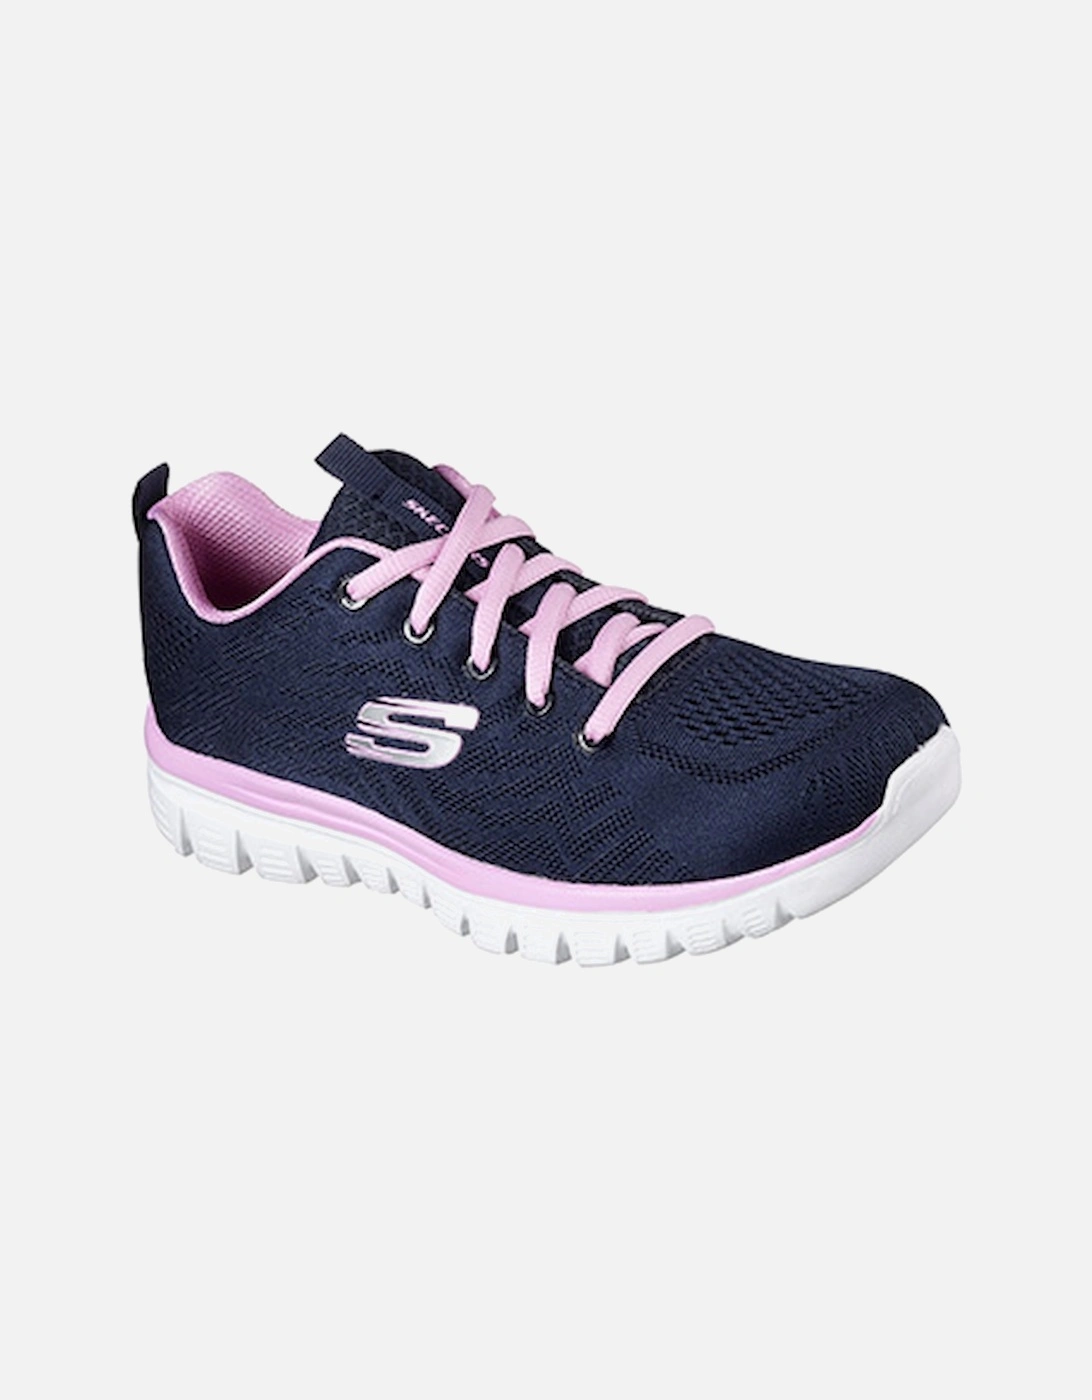 Women's Graceful Get Connected Sports Shoe Navy/Pink, 6 of 5